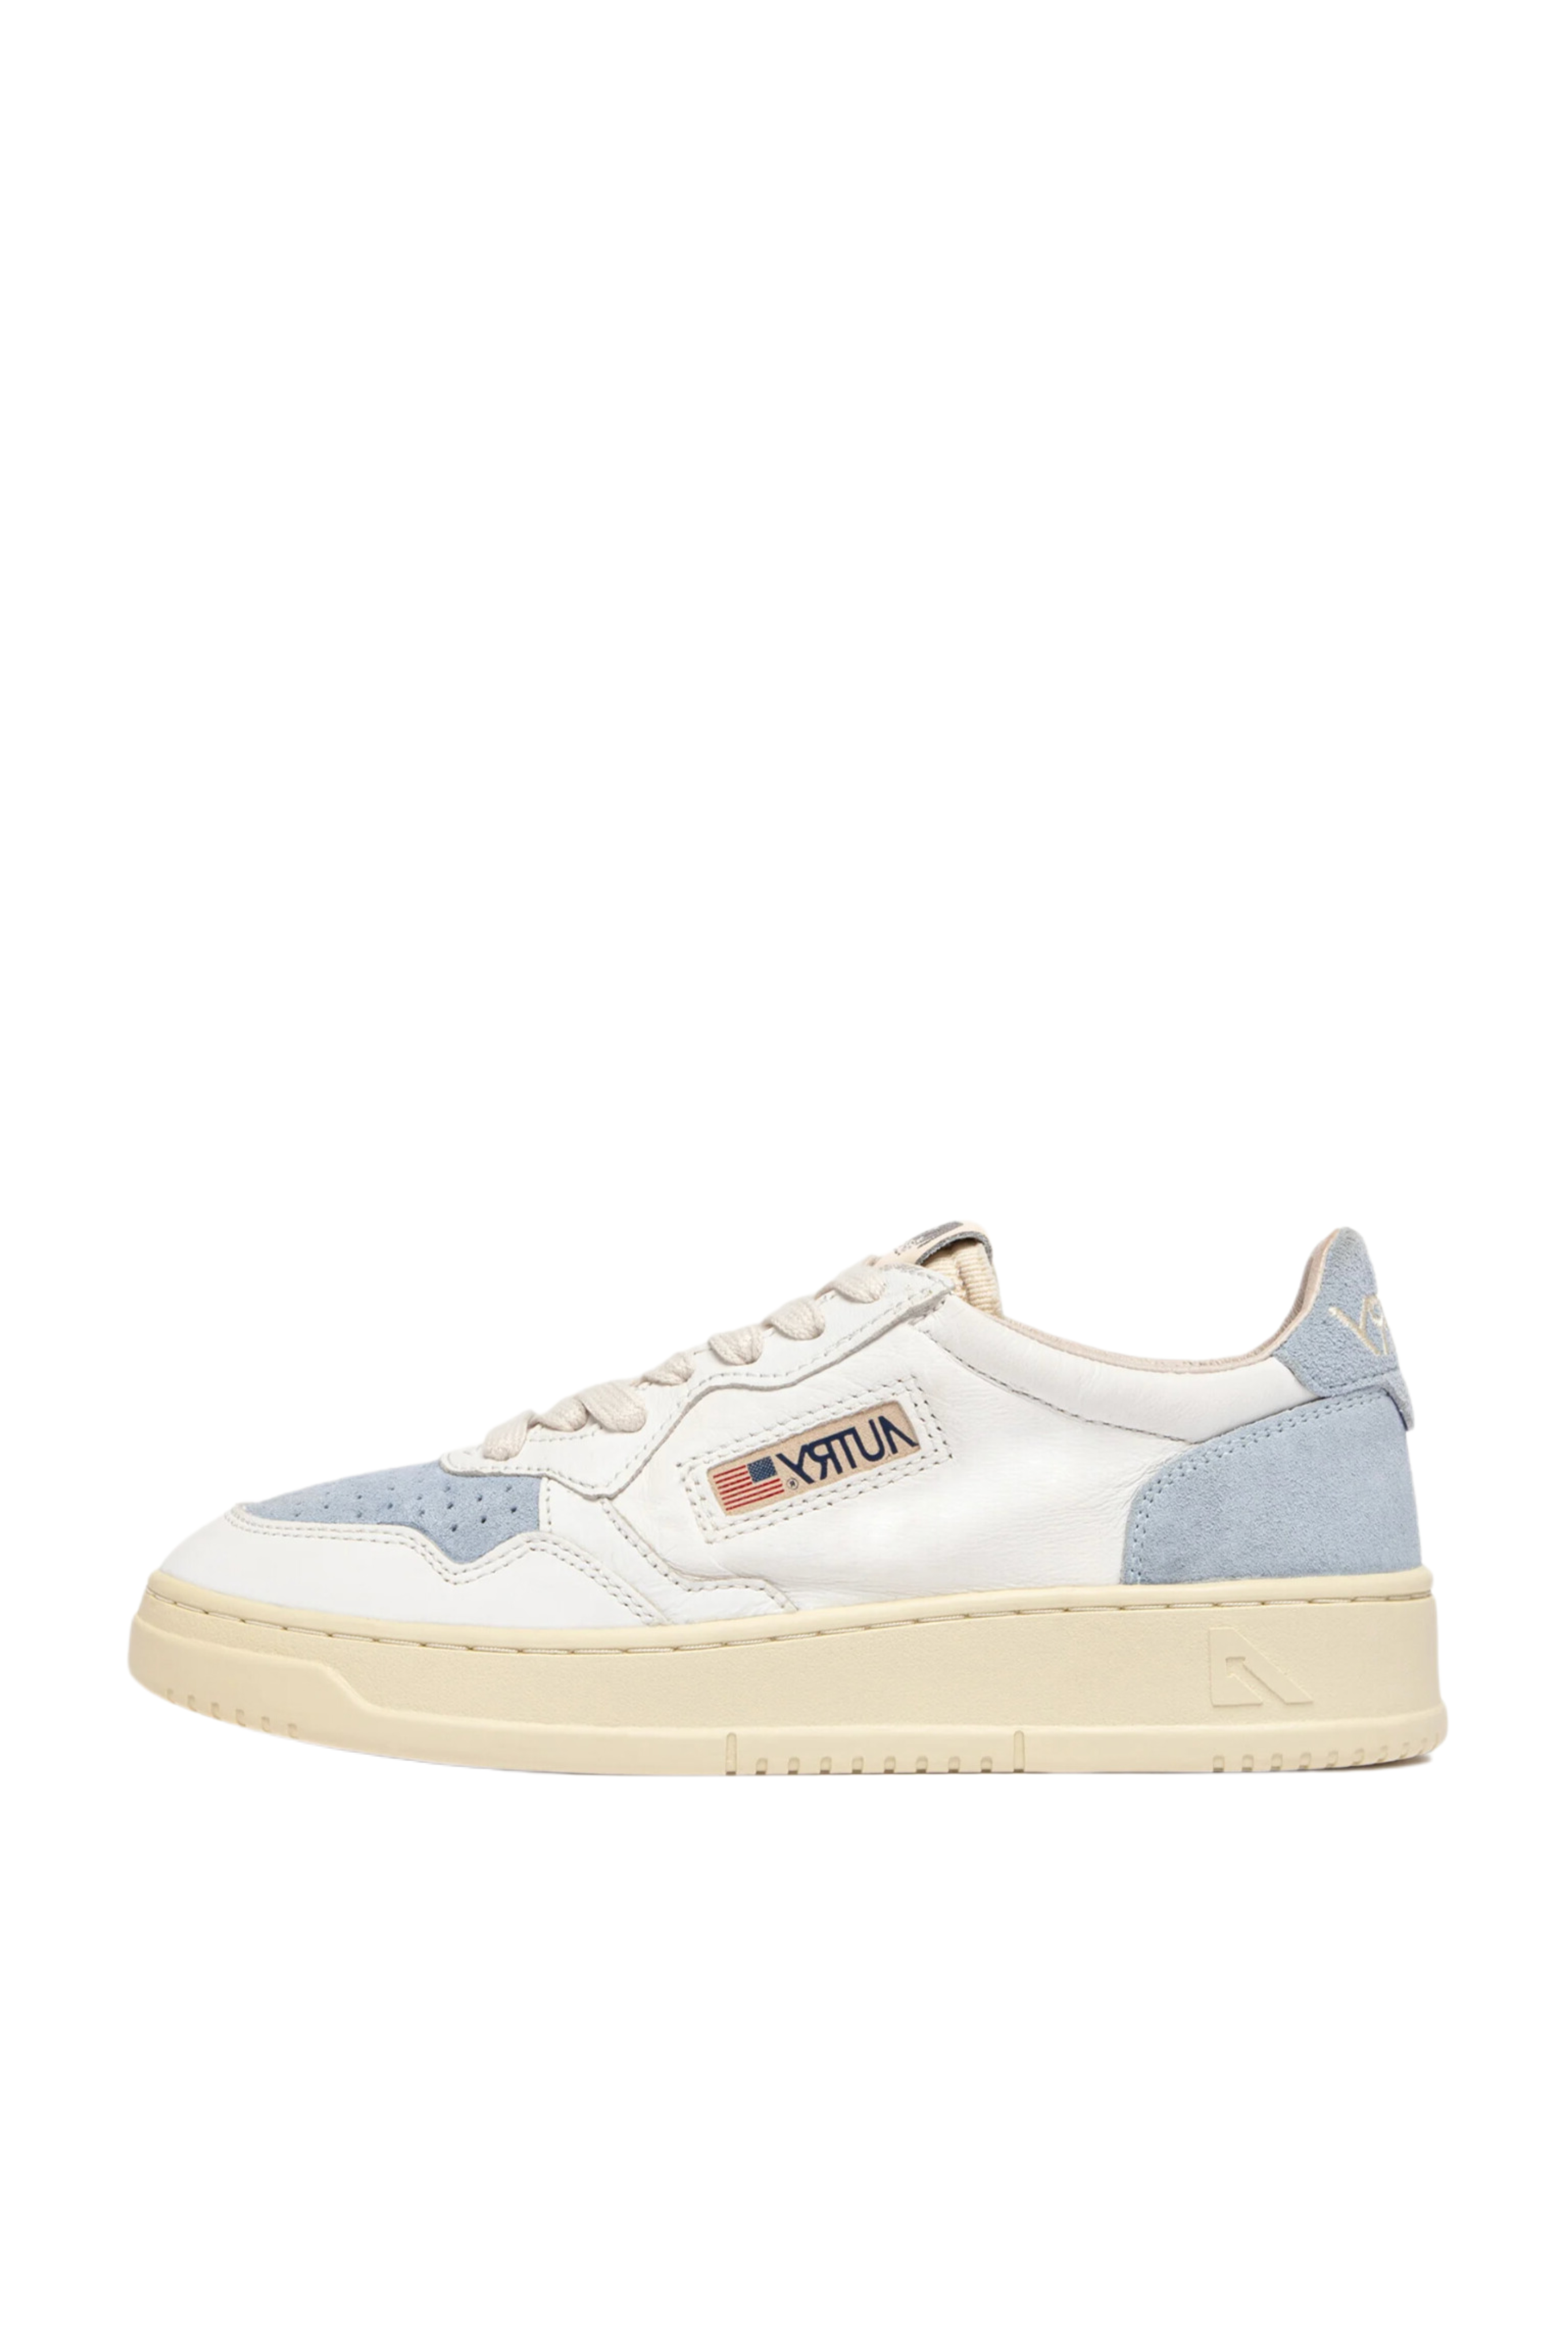 AULW-SL02 - MEDALIST LOW SNEAKER IN LEATHER AND SUEDE WHITE/TURQUOISE